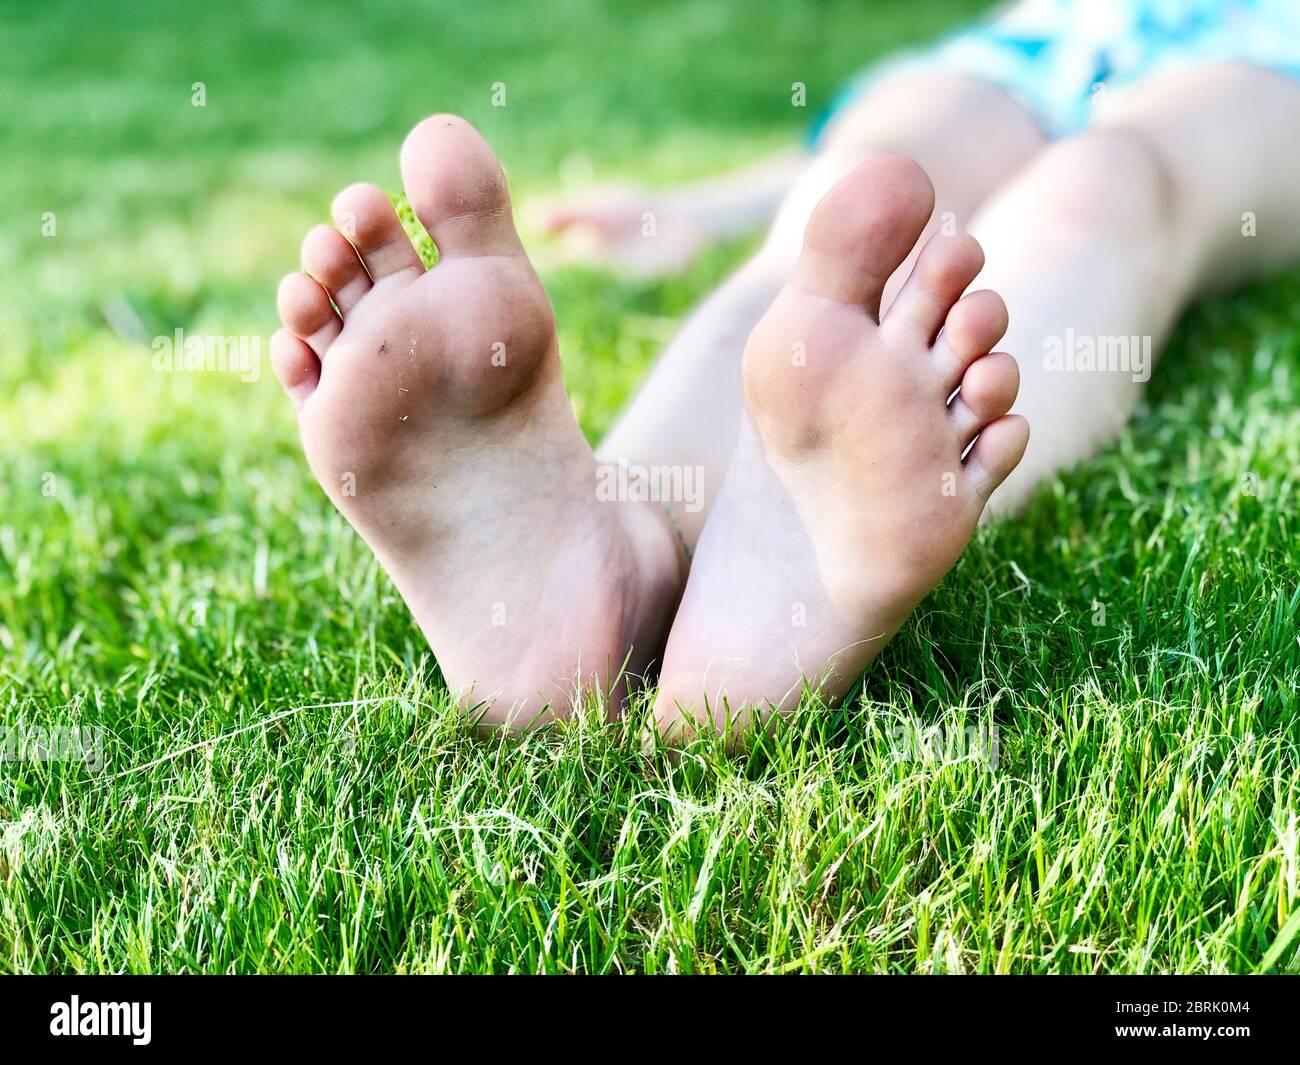 Kids Five Fingers On Green Grass Stock Photo 2244762073